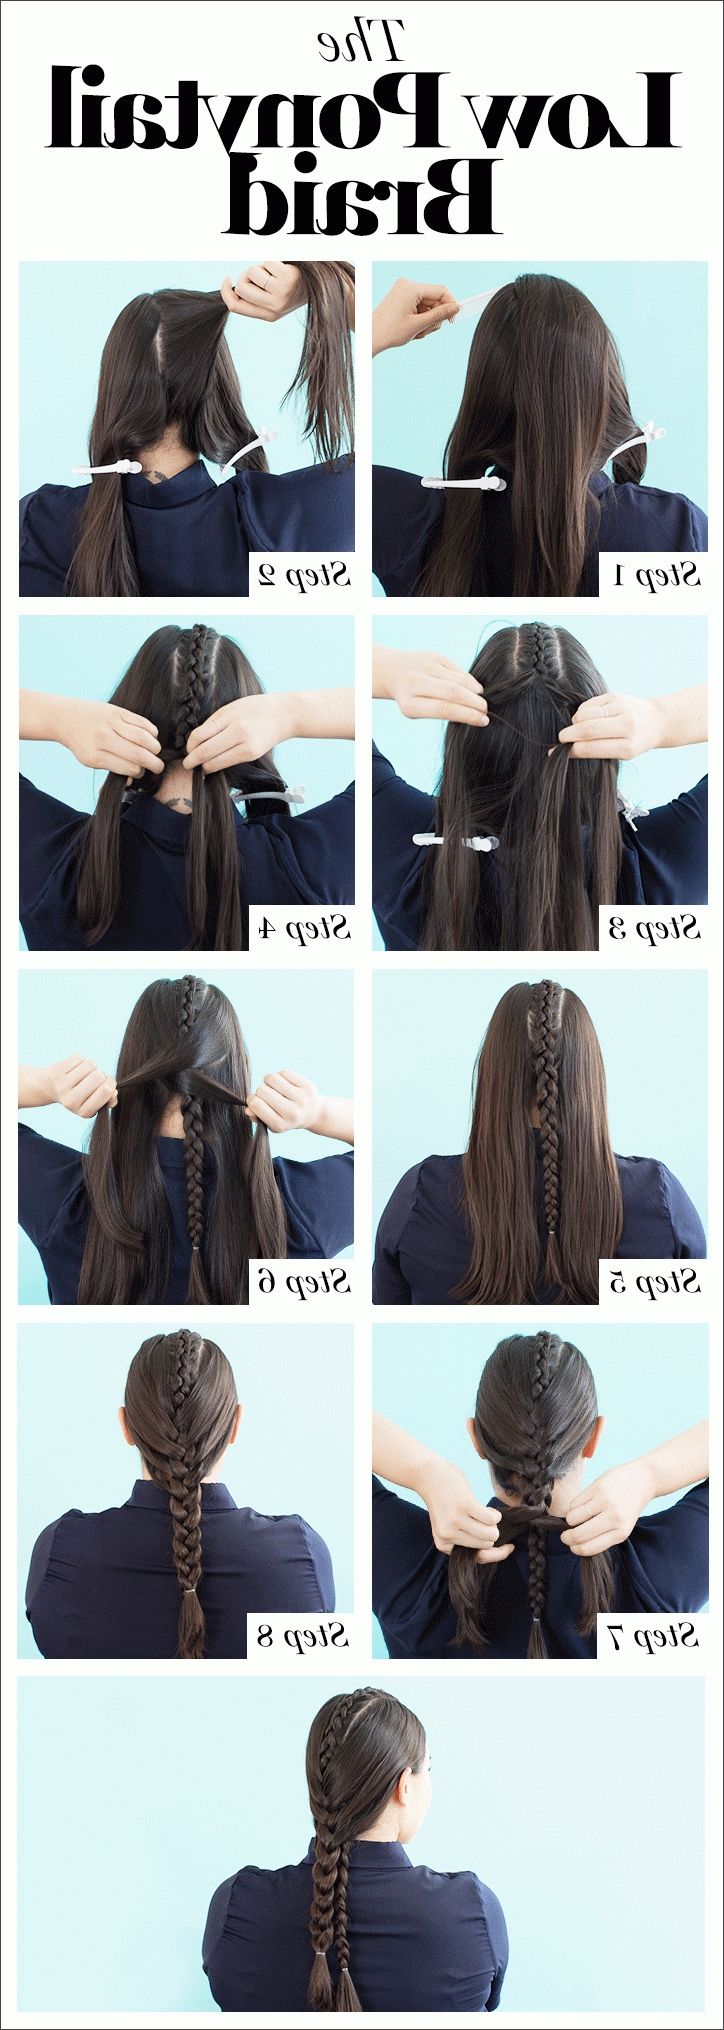 Fashionable Three Braids To One Ponytail Hairstyles Within How To Braid Hair: 8 Cute Diy Hairstyles For Every Hair Type (View 14 of 20)